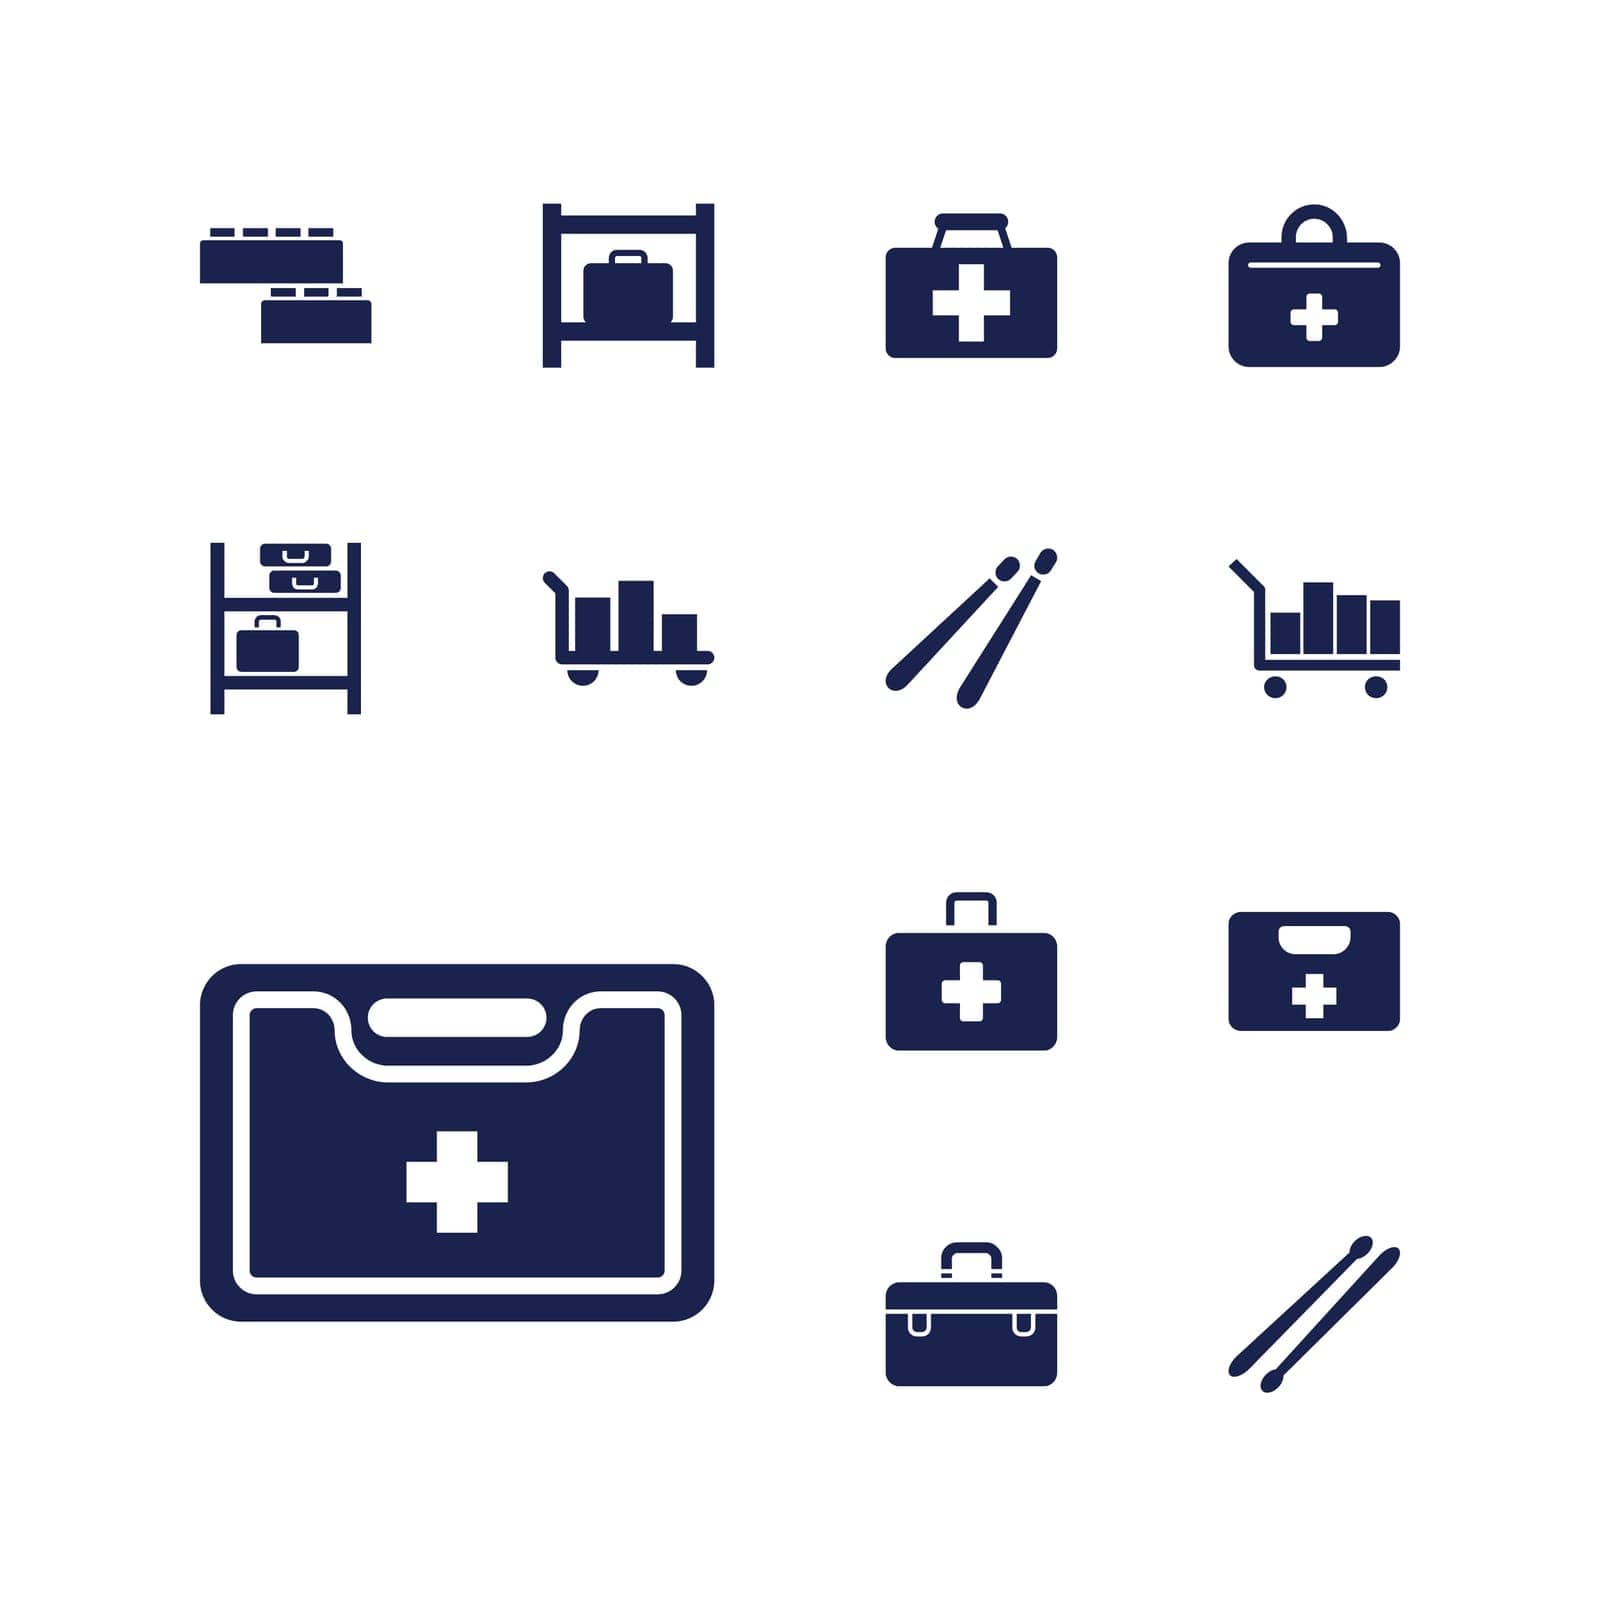 container,symbol,medical,icon,sign,isolated,bag,drum,emergency,box,storage,building,luggage,flat,patient,design,kit,stick,vector,hospital,graphic,case,set,suitcase,cross,medicine,tool,doctor,help,background,silhouette,toolbox,illustration,aid,first,child,care